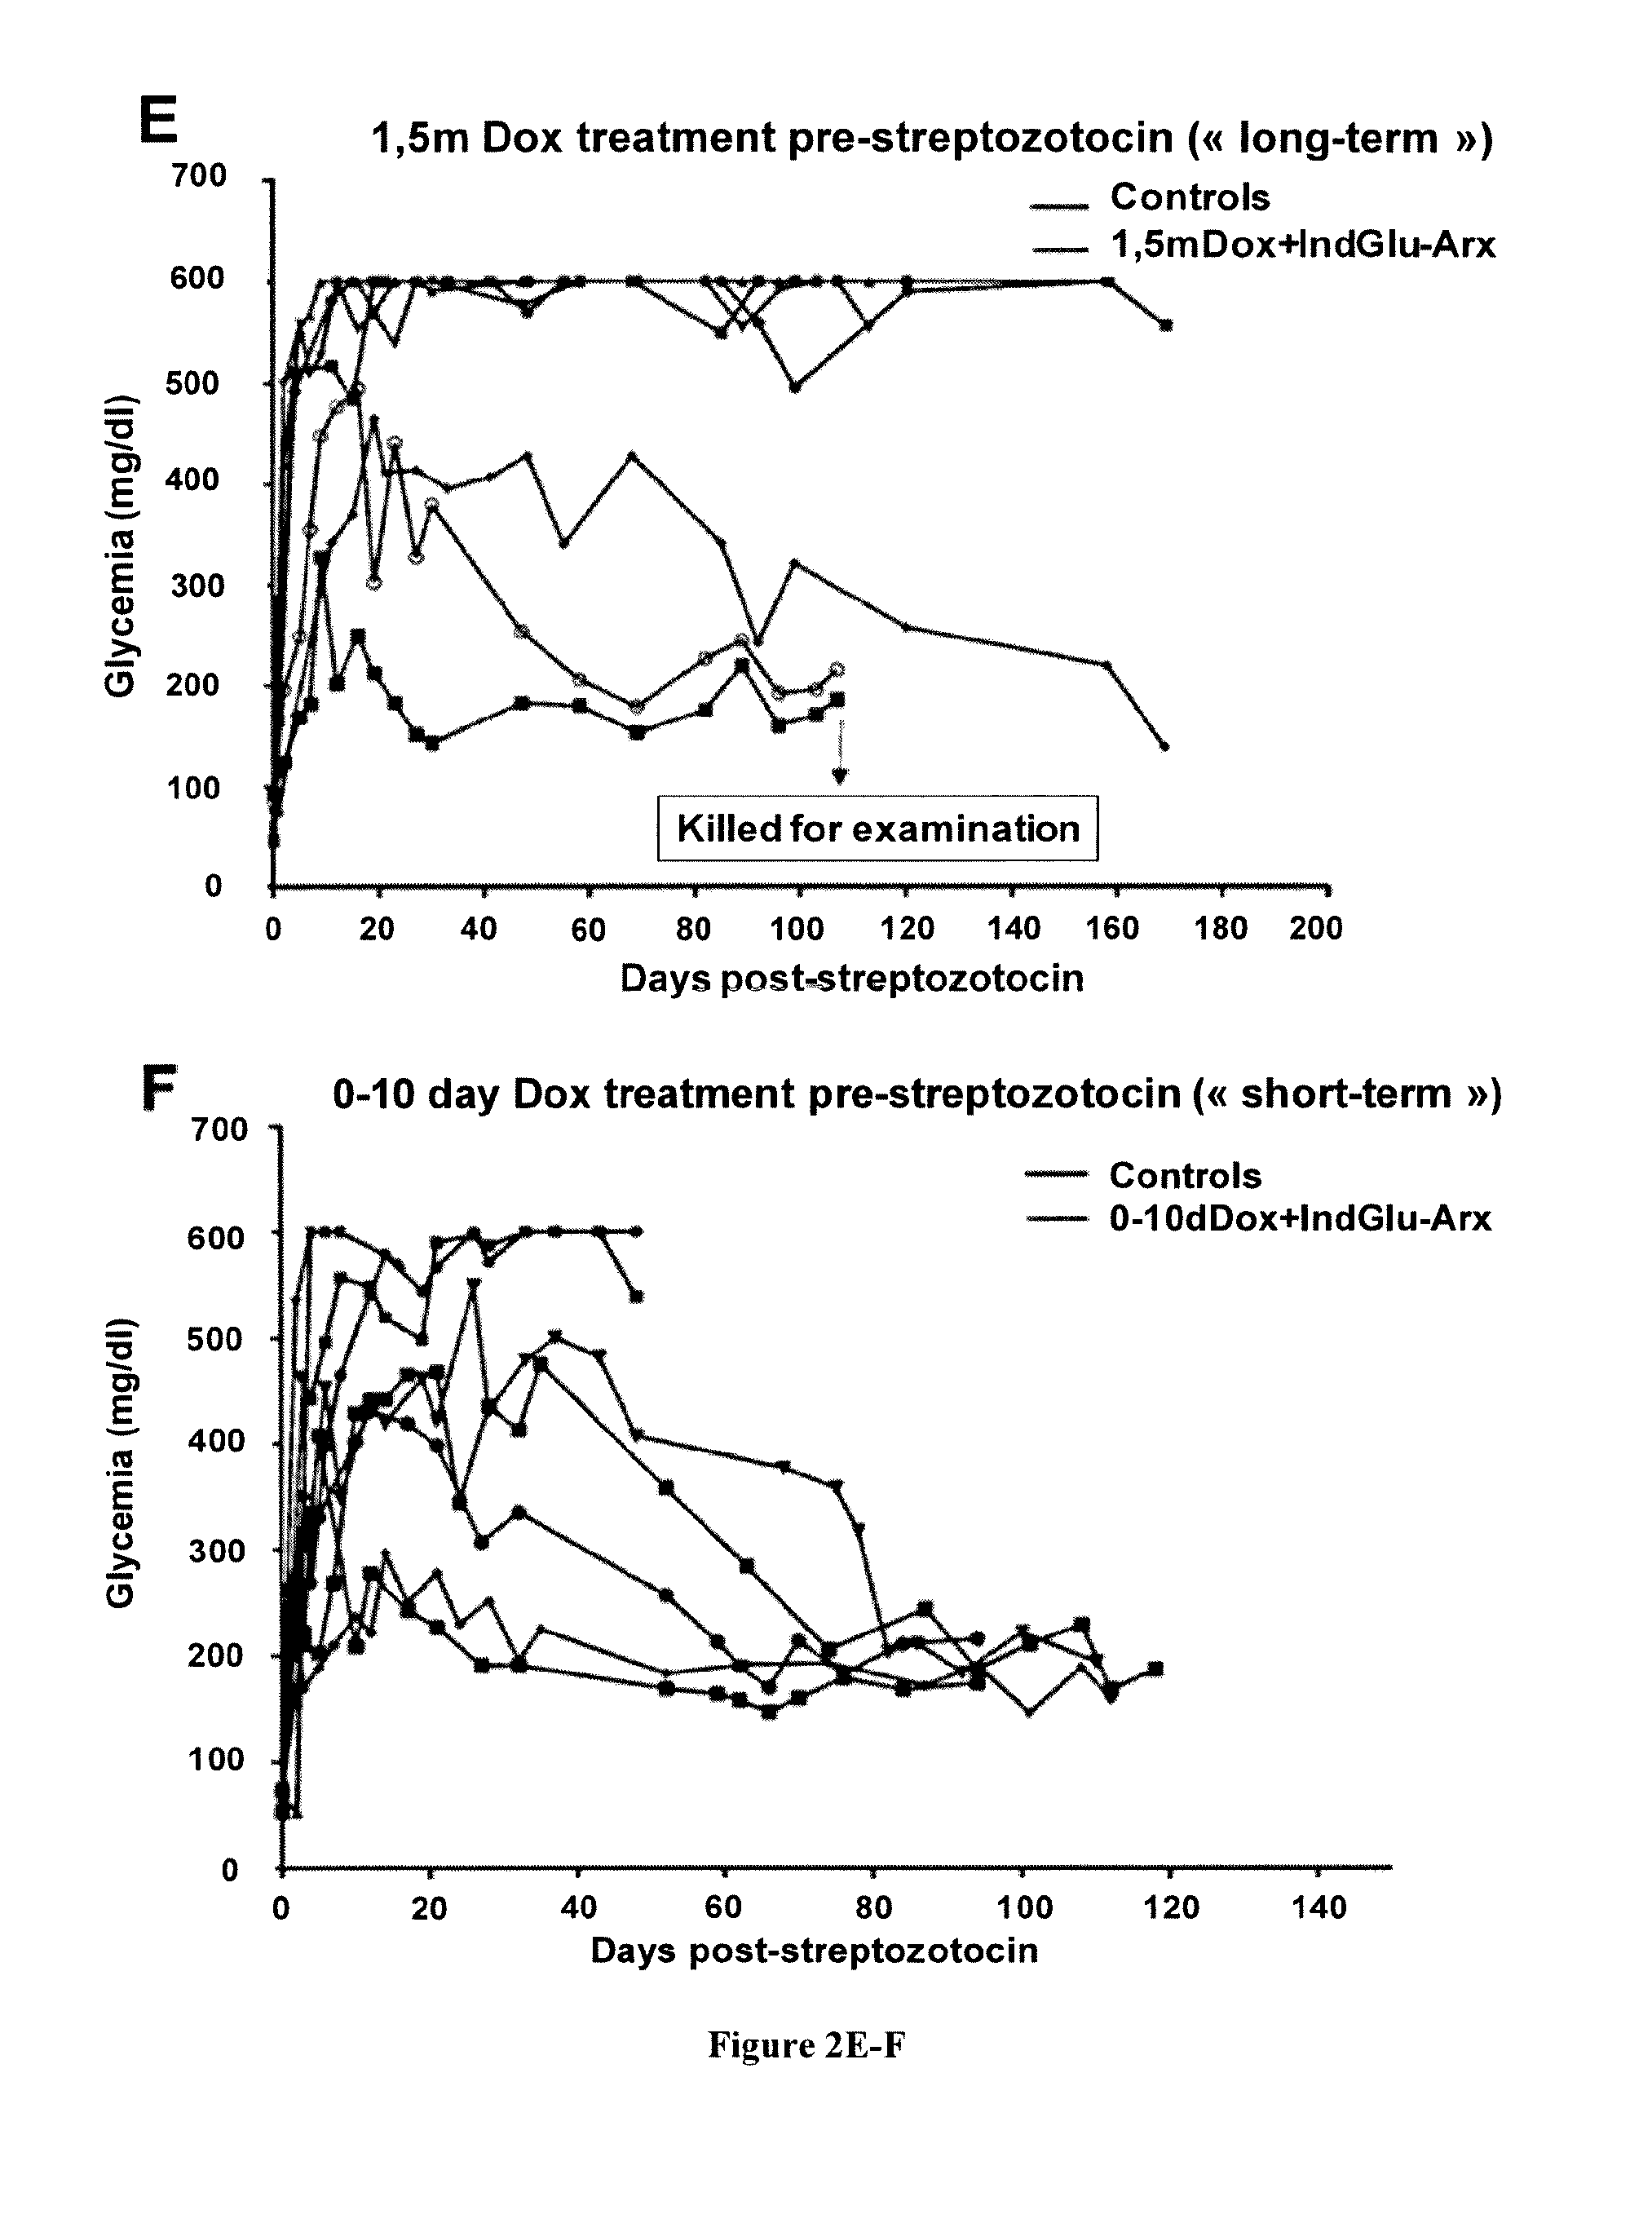 Methods for producing a population of pancreatic beta-cells